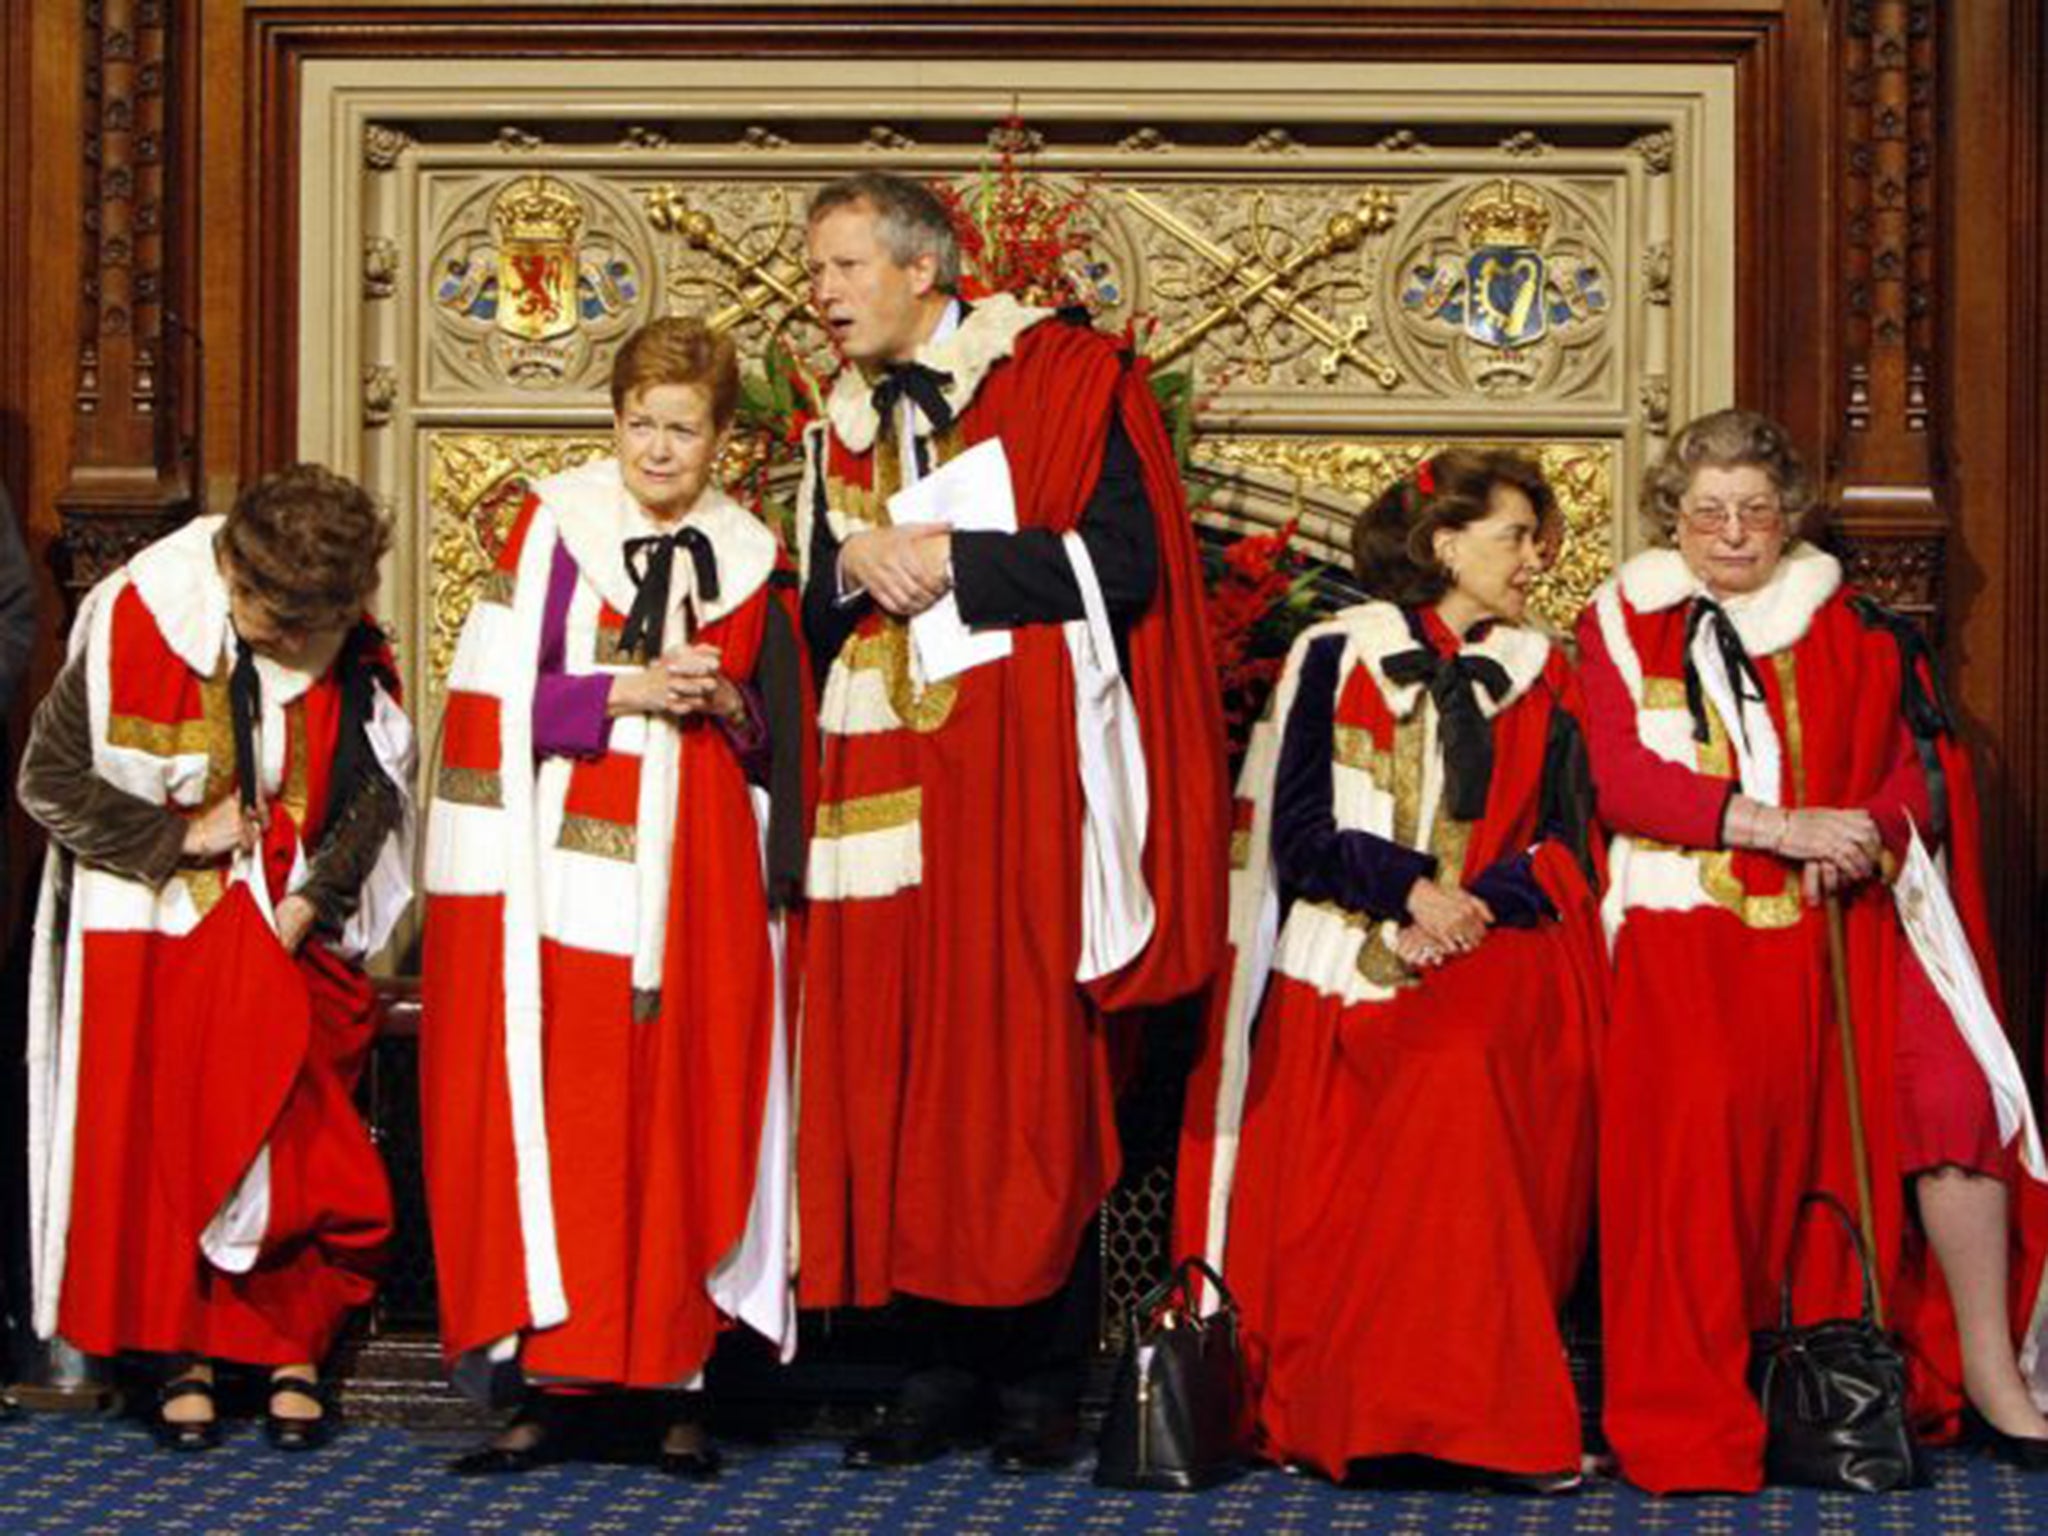 Members of the House of Lords gather for the state opening of Parliament